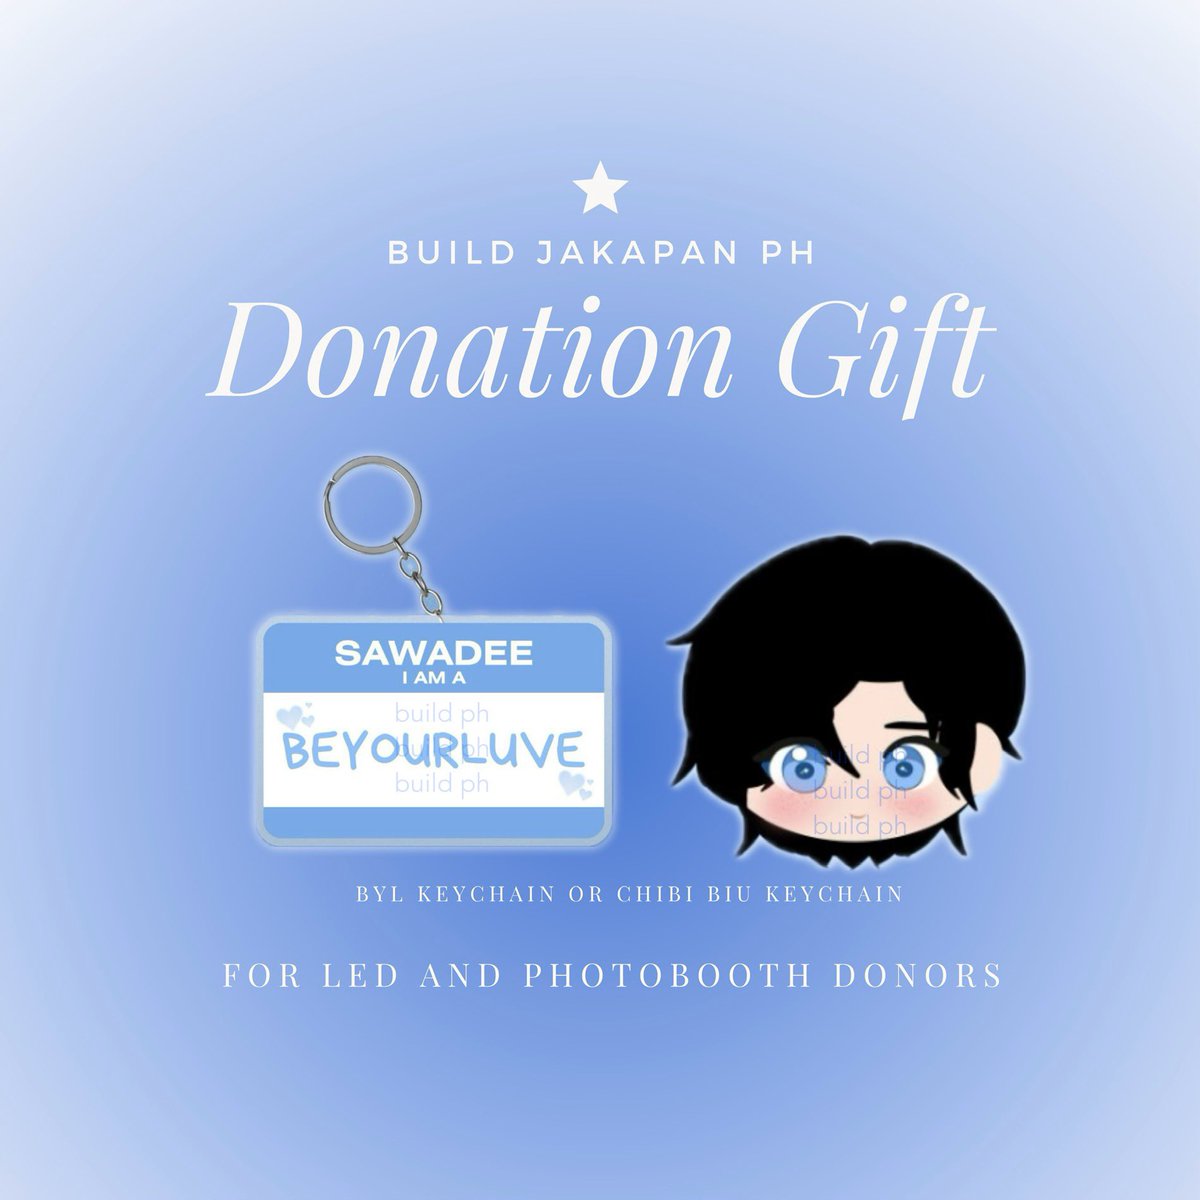 📺 Terminal E-Posters LED Update 🎯20,000 Baht 💰5k+ Baht We’re moving fast to Biu’s 30th BD luves, we decided if we don’t reach the target amount by May 25th we will just spend the funds to different projects. TYSM. Every amount is appreciated. 💙🙏🏼 *donors will receive a…